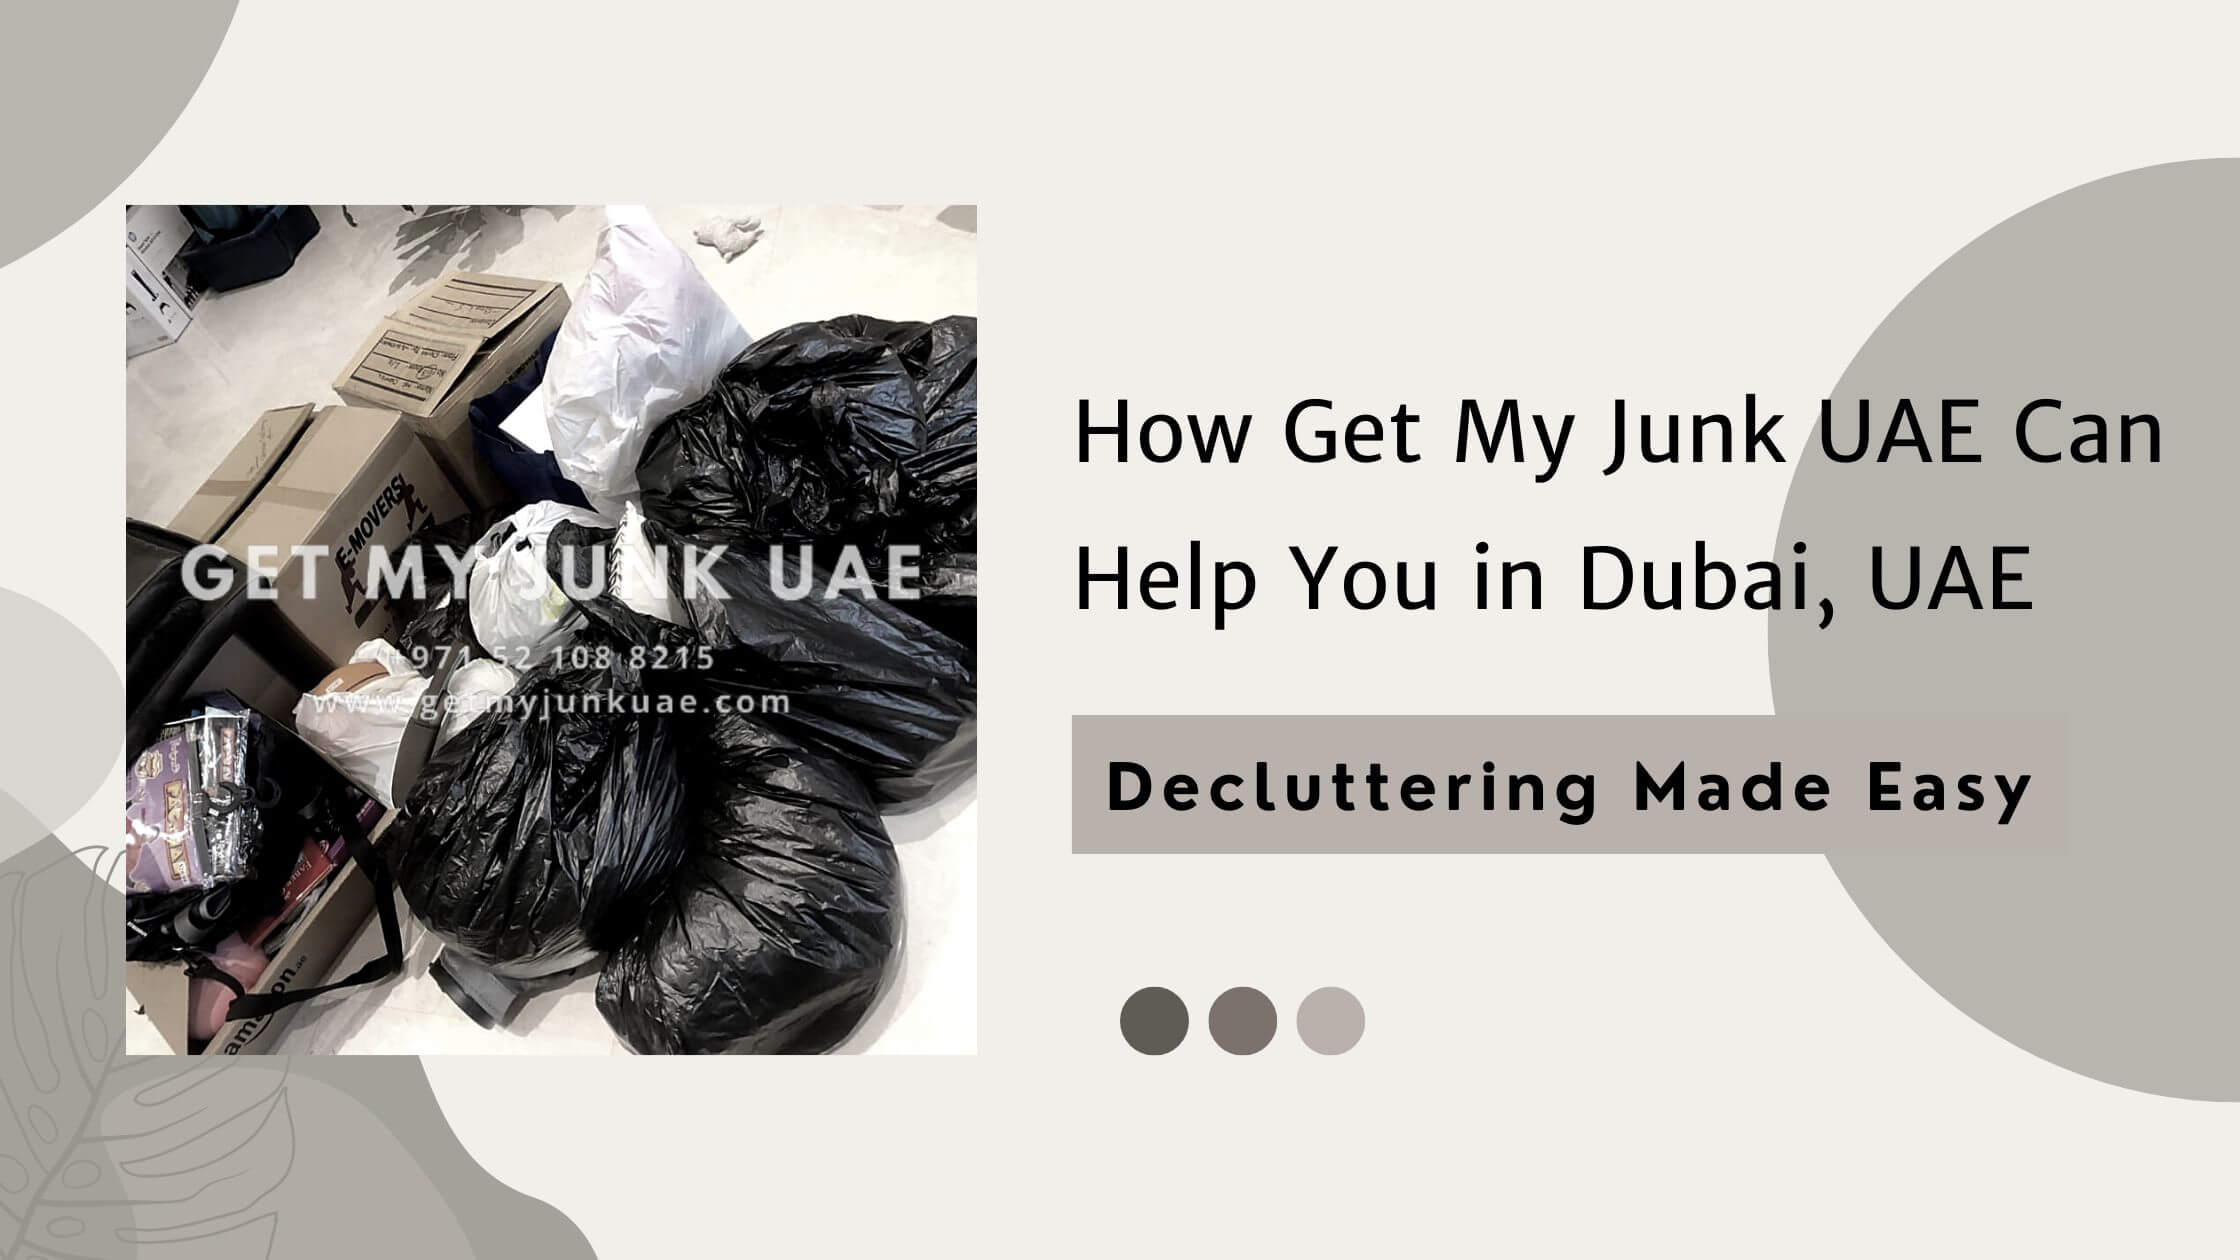 Decluttering Made Easy How Get My Junk UAE Can Help You in Dubai, UAE